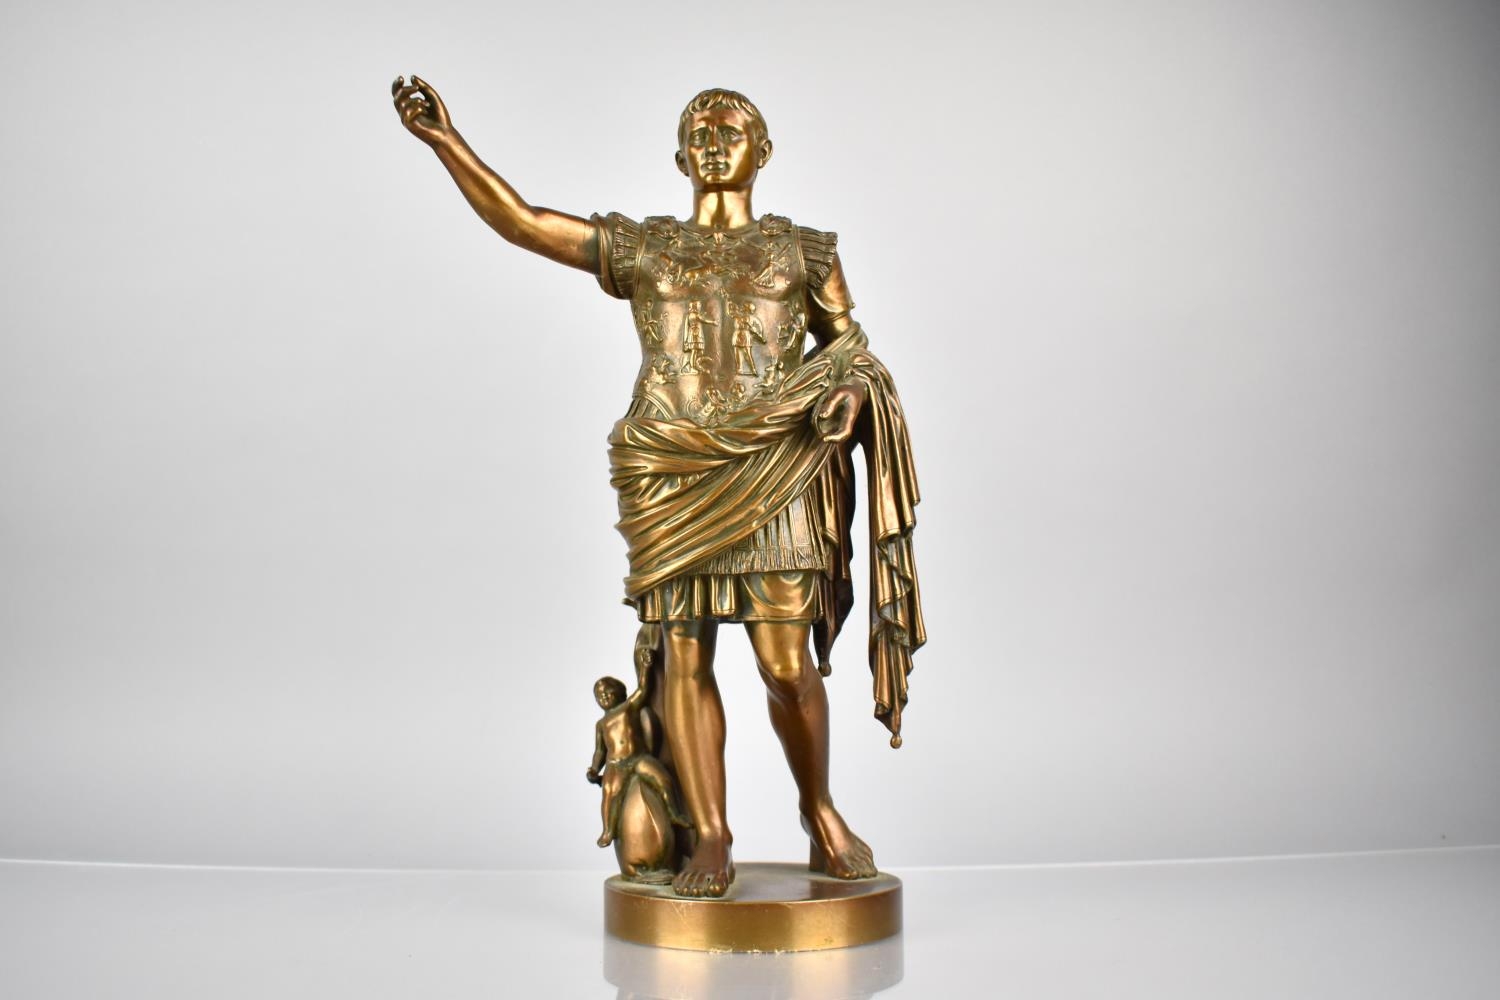 A Bronze Figure Of Augustus Caesar, Depicted with Arm Outstretched and with Putto by His Side,